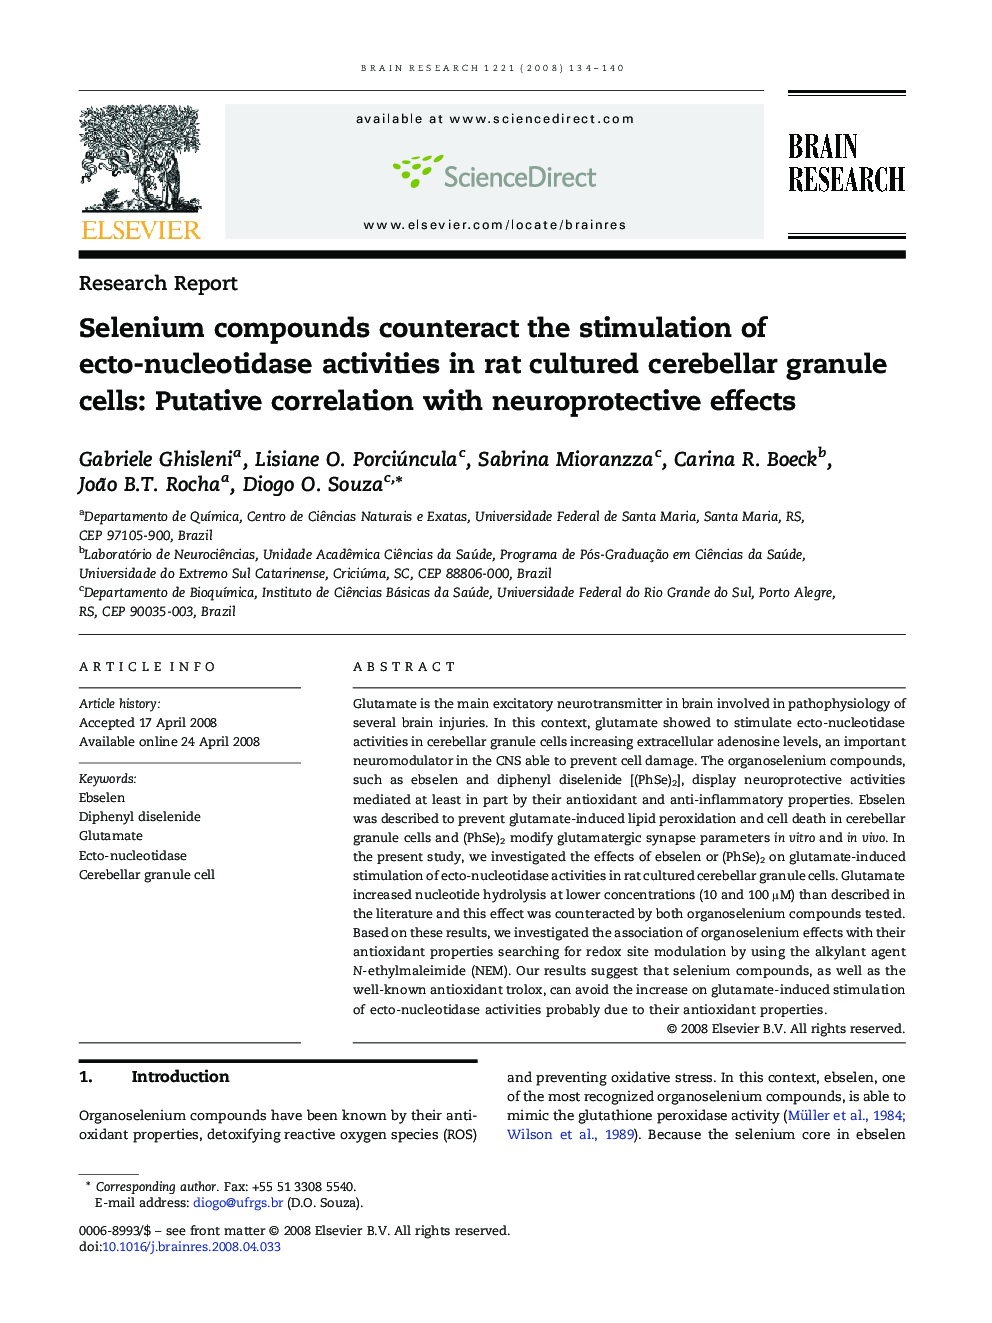 Selenium compounds counteract the stimulation of ecto-nucleotidase activities in rat cultured cerebellar granule cells: Putative correlation with neuroprotective effects